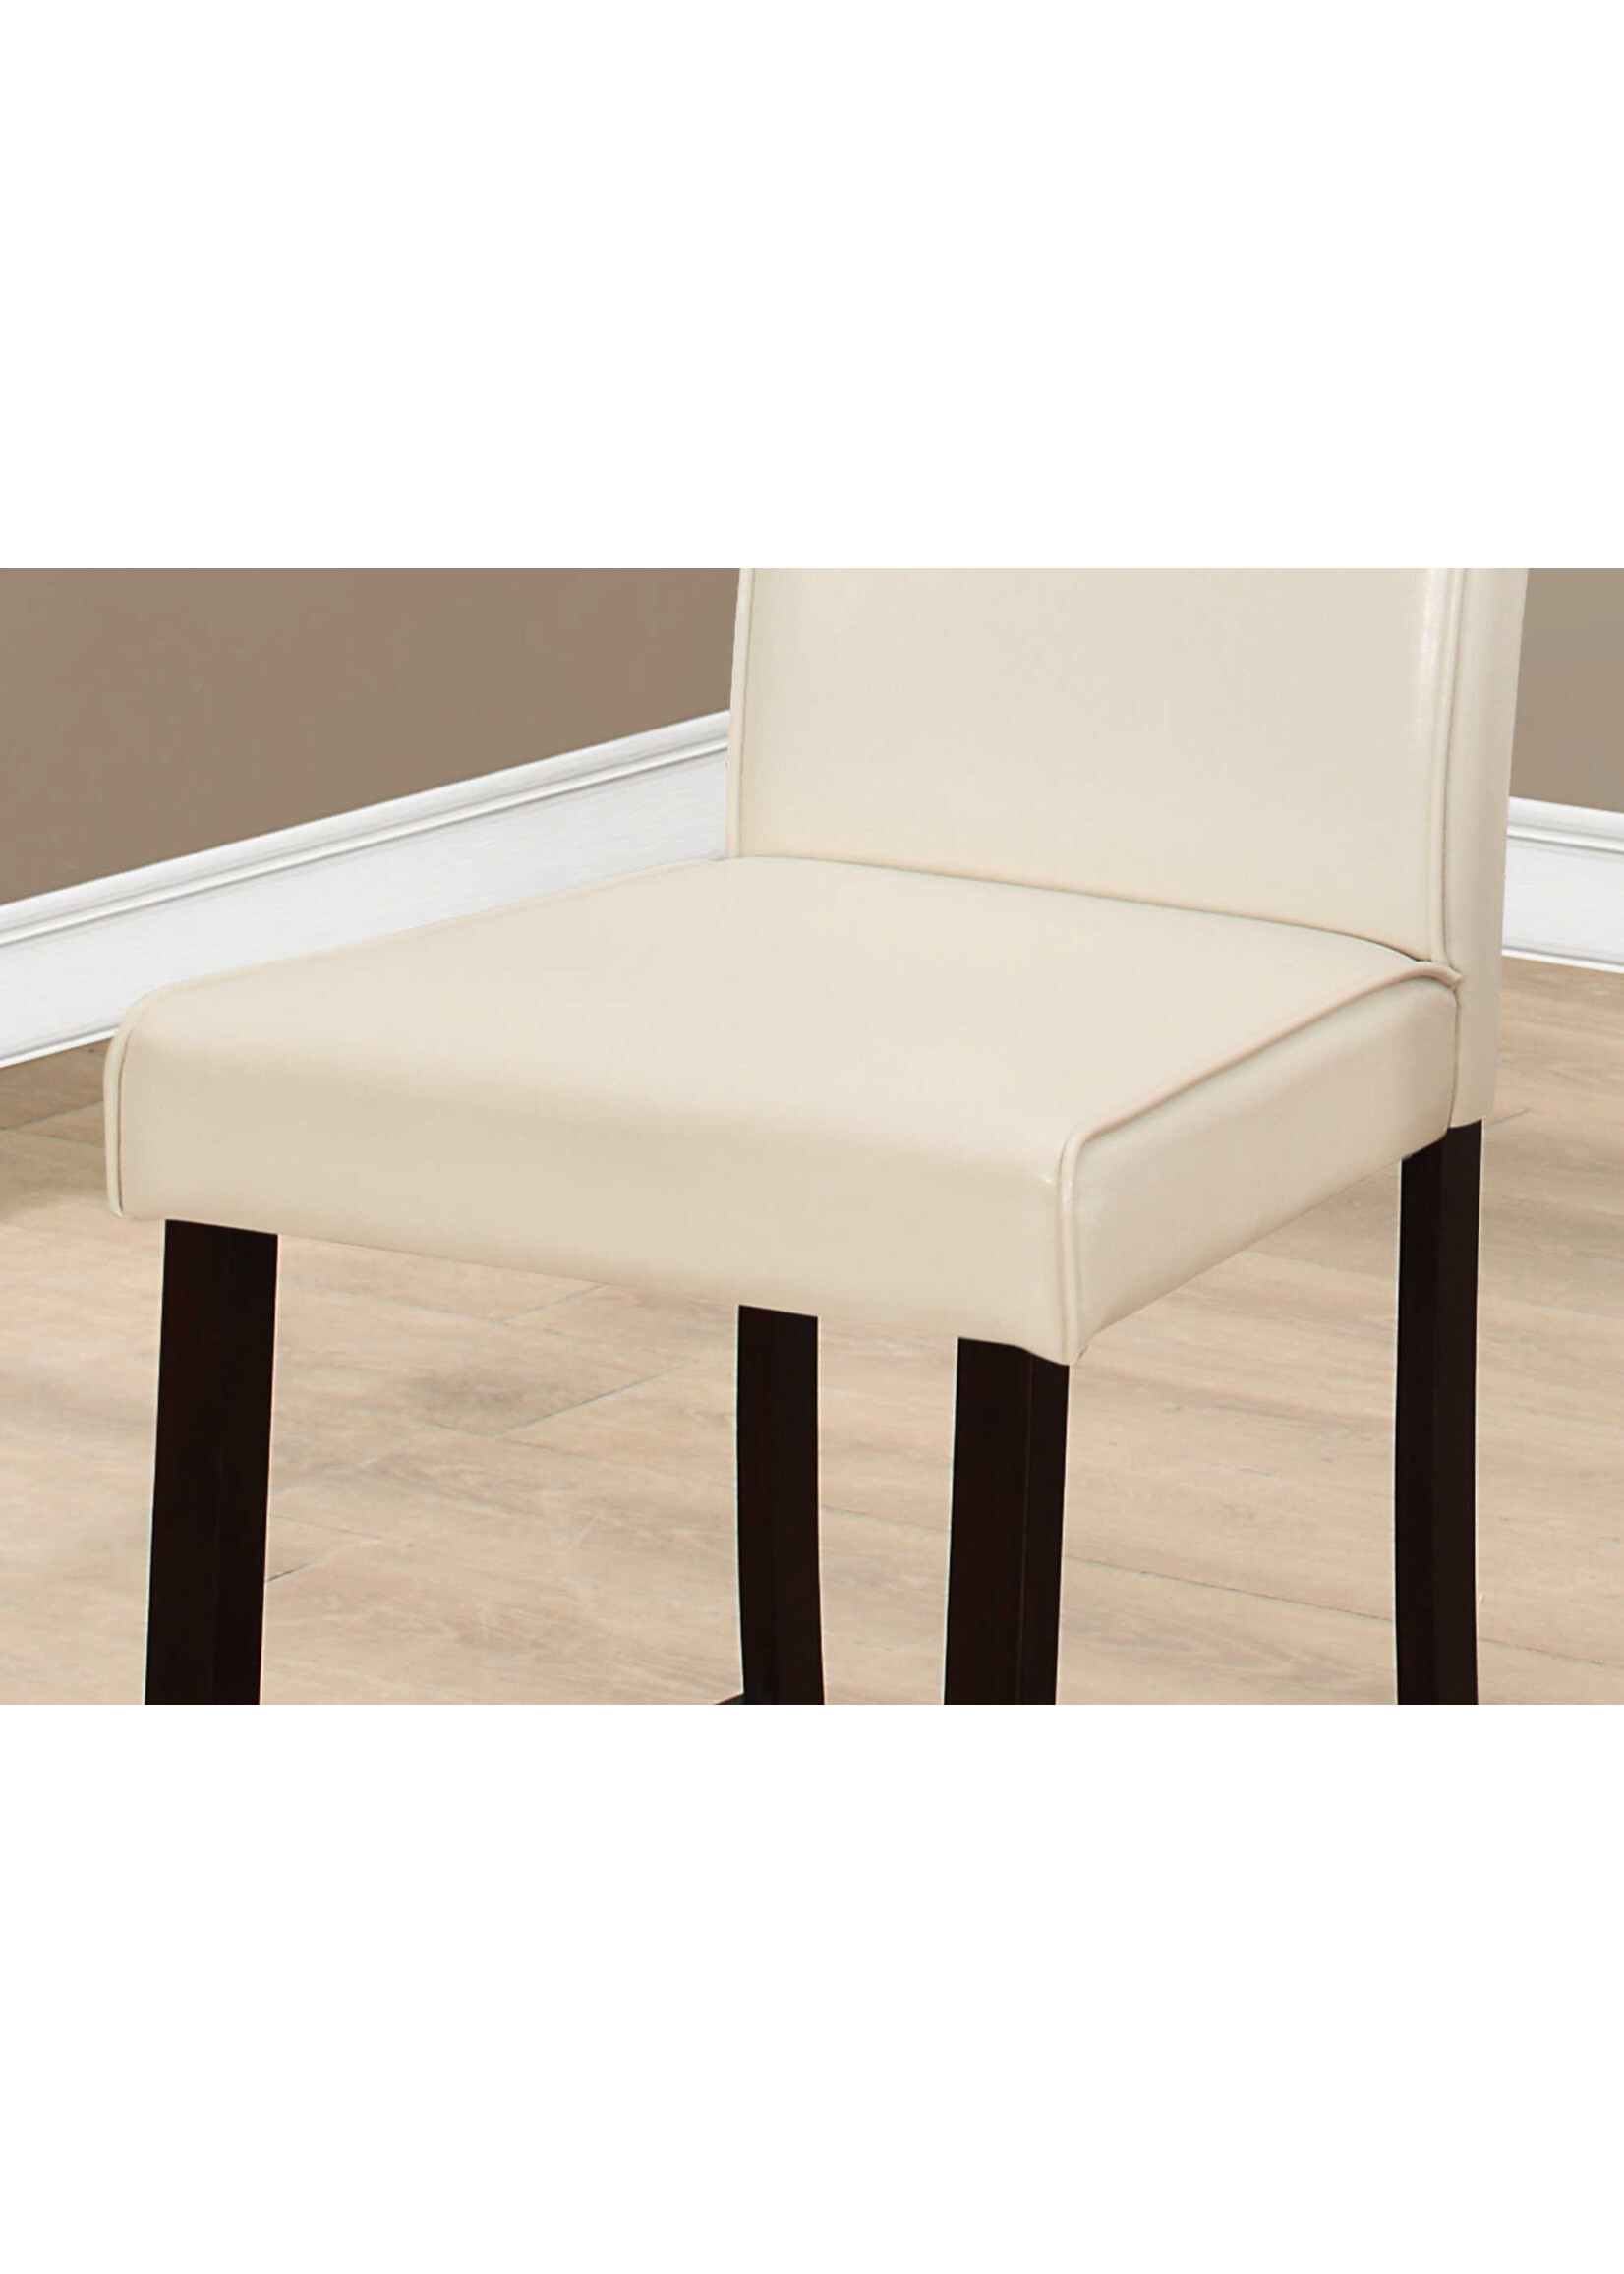 DINING CHAIR - 2PCS / IVORY LEATHER-LOOK COUNTER HEIGHT